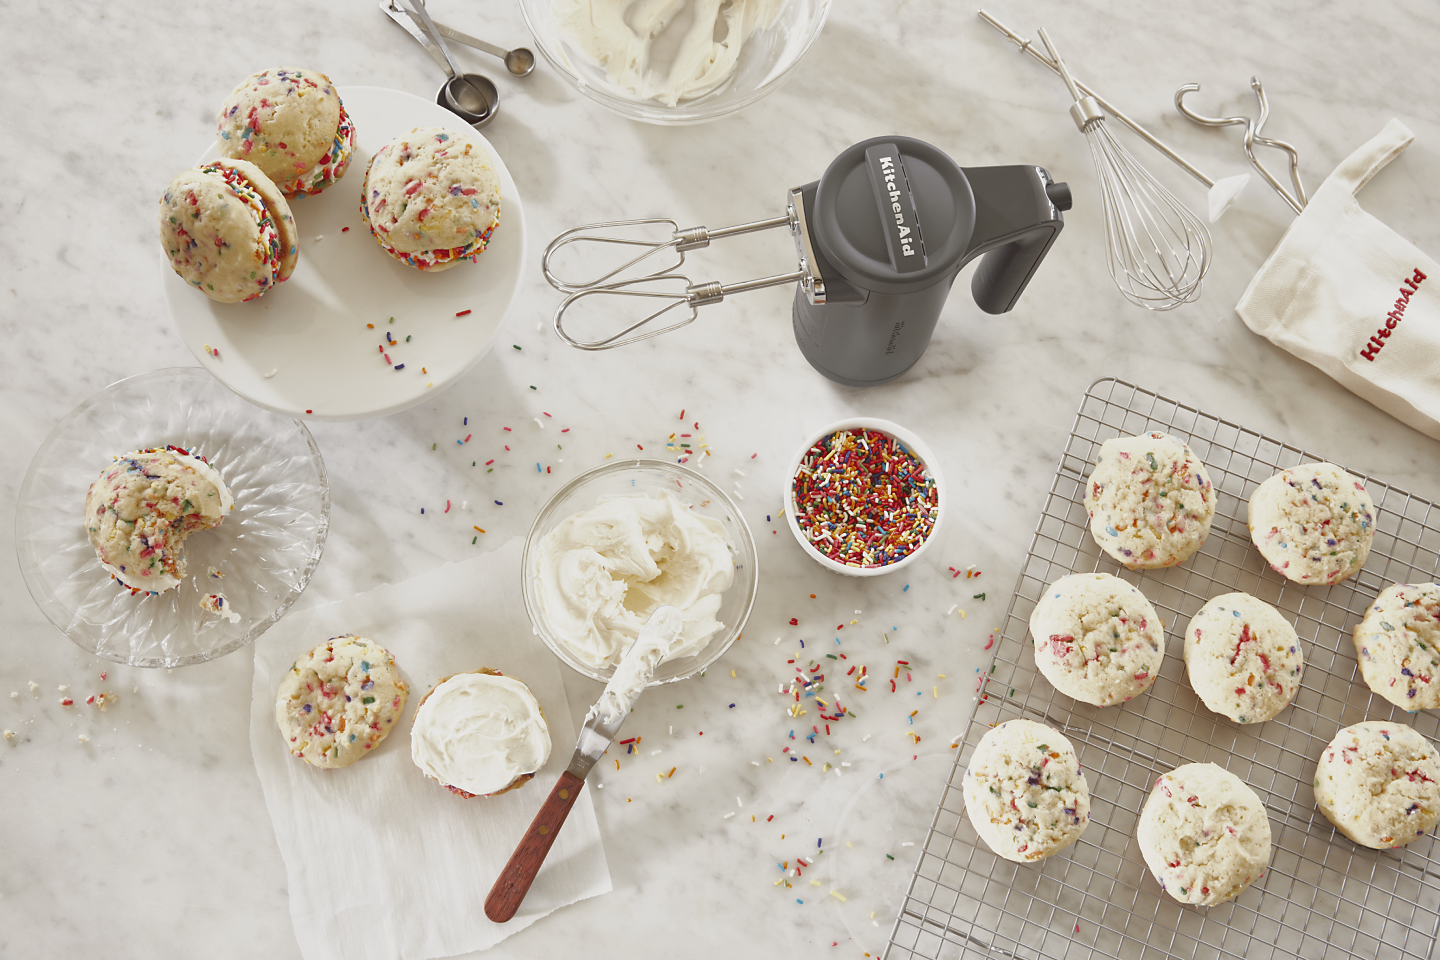 Gray KitchenAid® hand mixer standing upright on countertop along with sandwich cookies, frosting, sprinkles and beater accessories